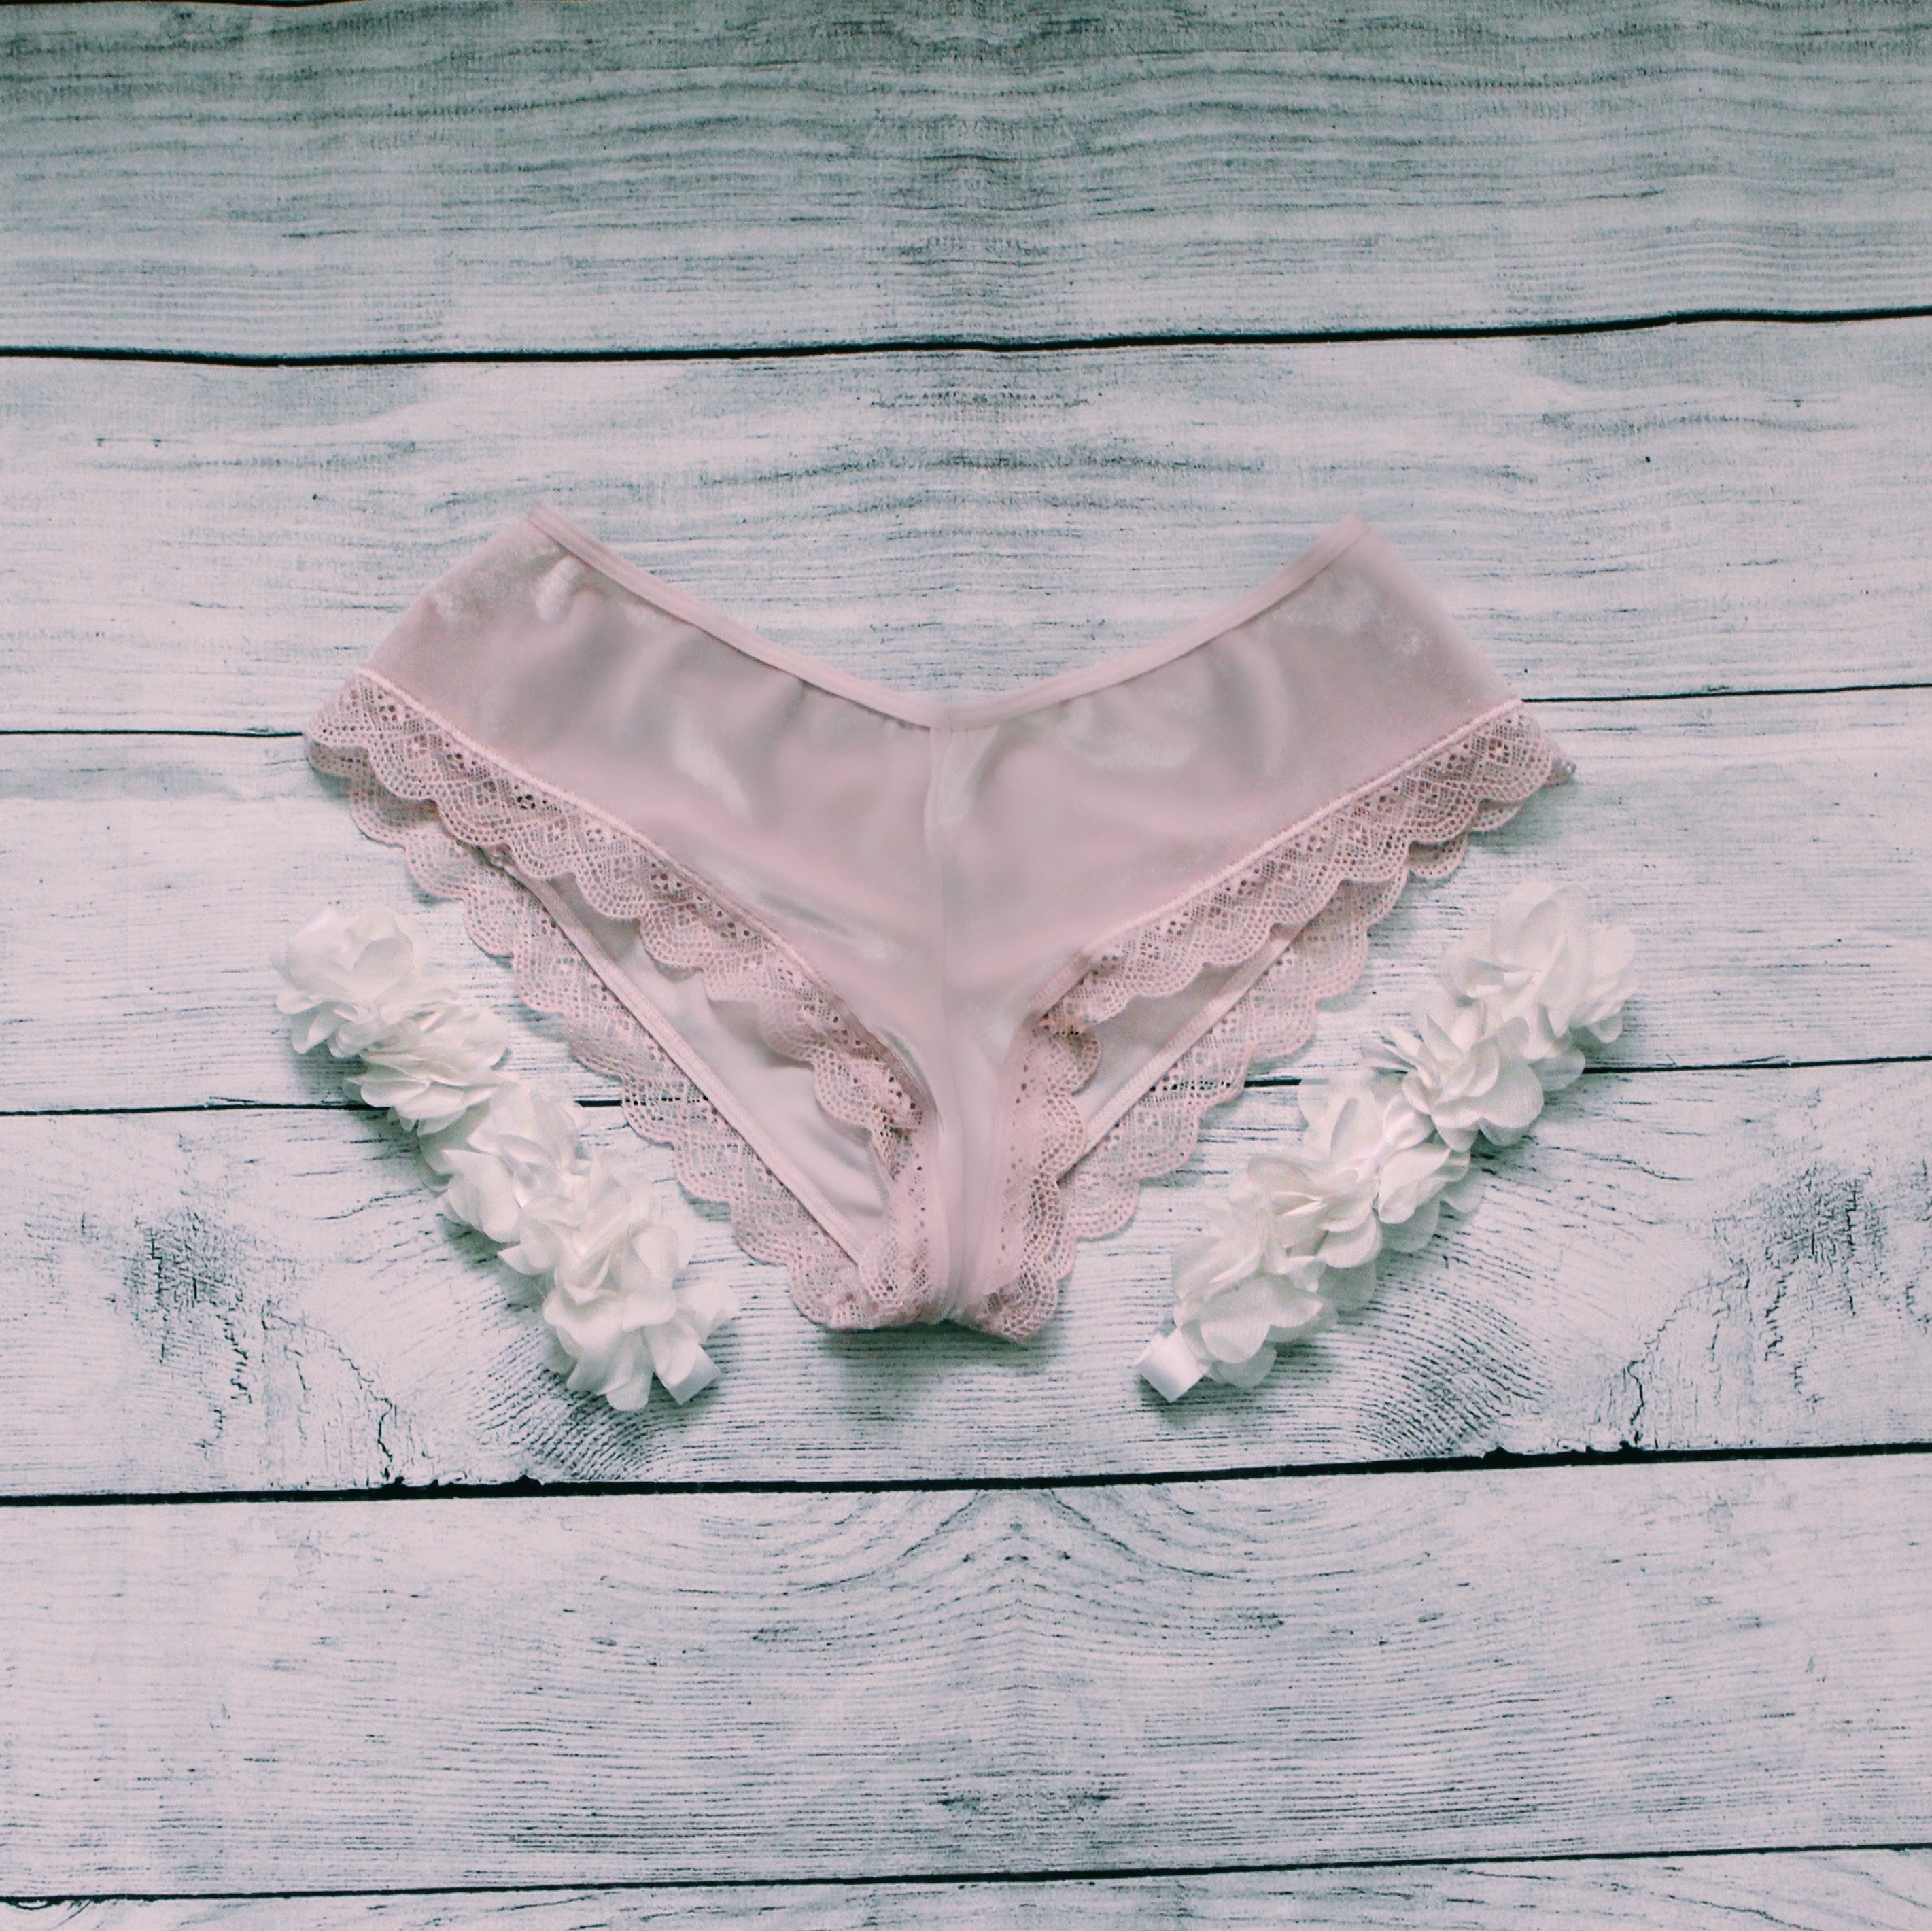 White Daisy Leg Garters Flaylay with Pink Lingerie